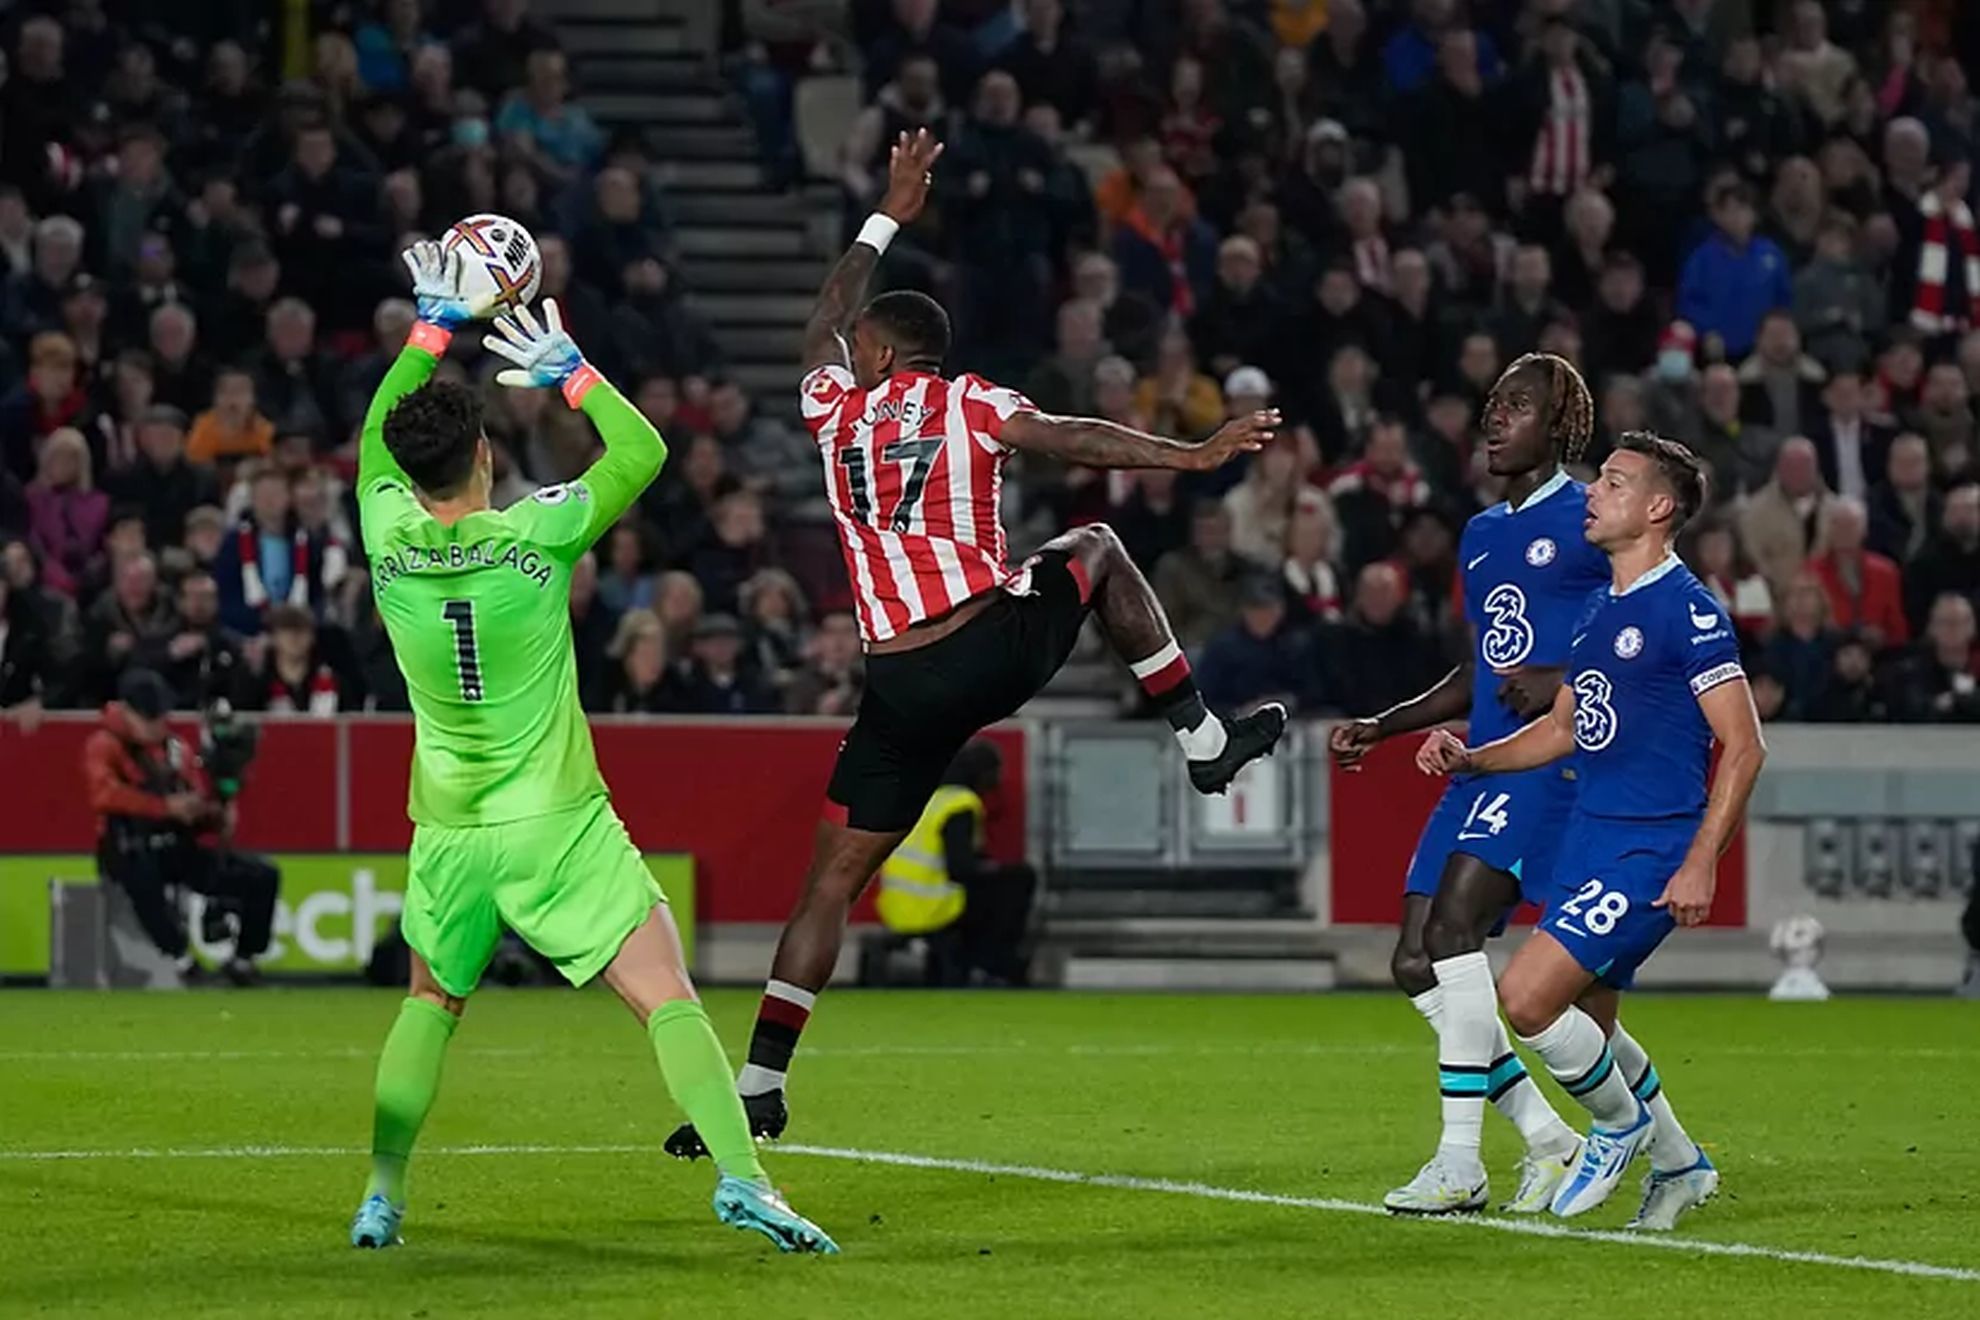 Kepa Arrizabalaga helps Chelsea escape Brentford with a point